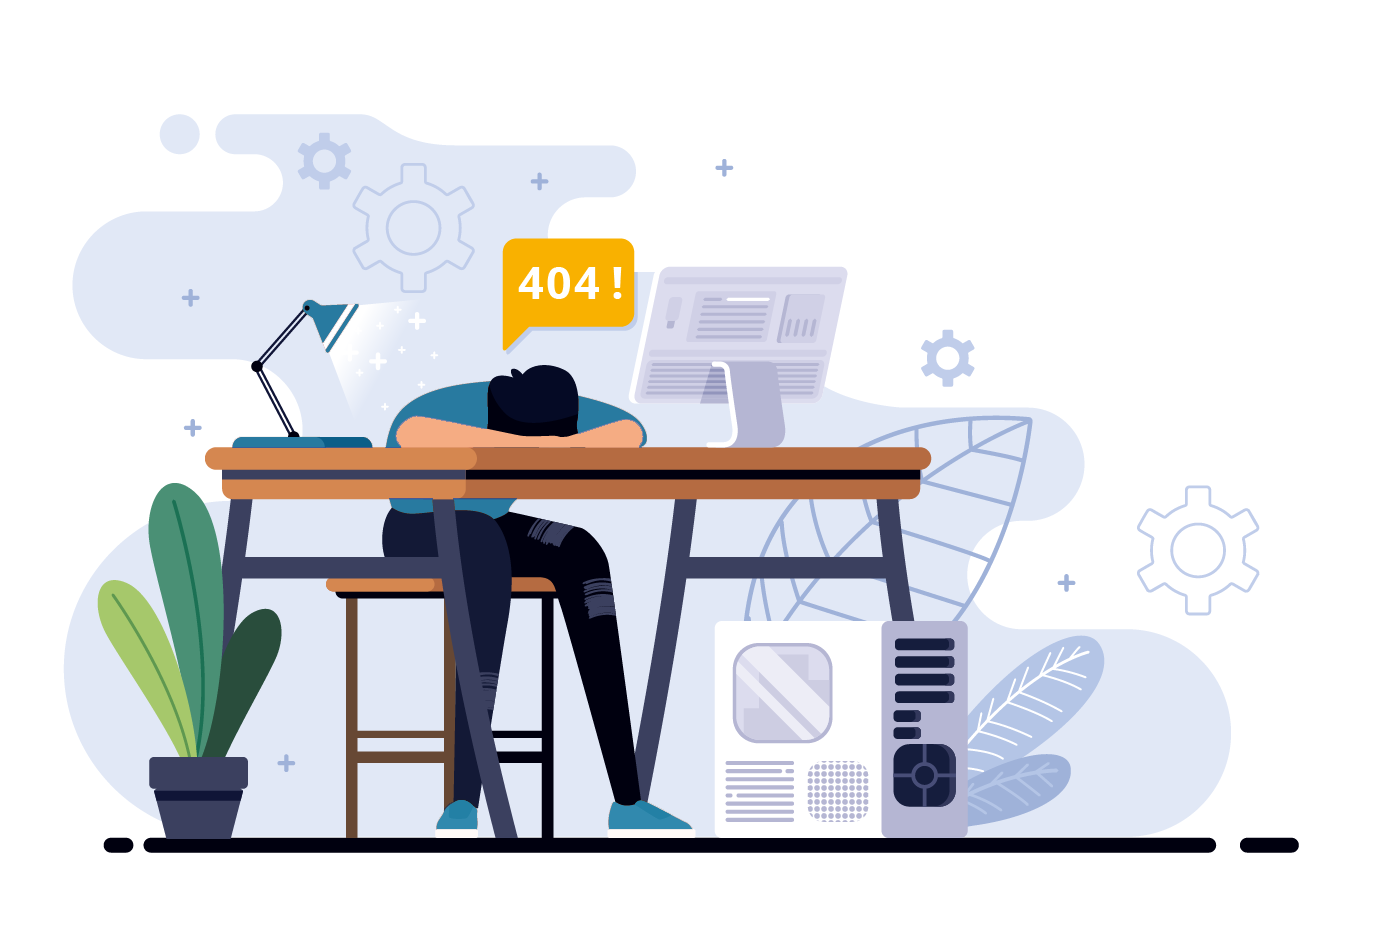 An illustration of a frustrated person banging their head on the desk over a 404 error.